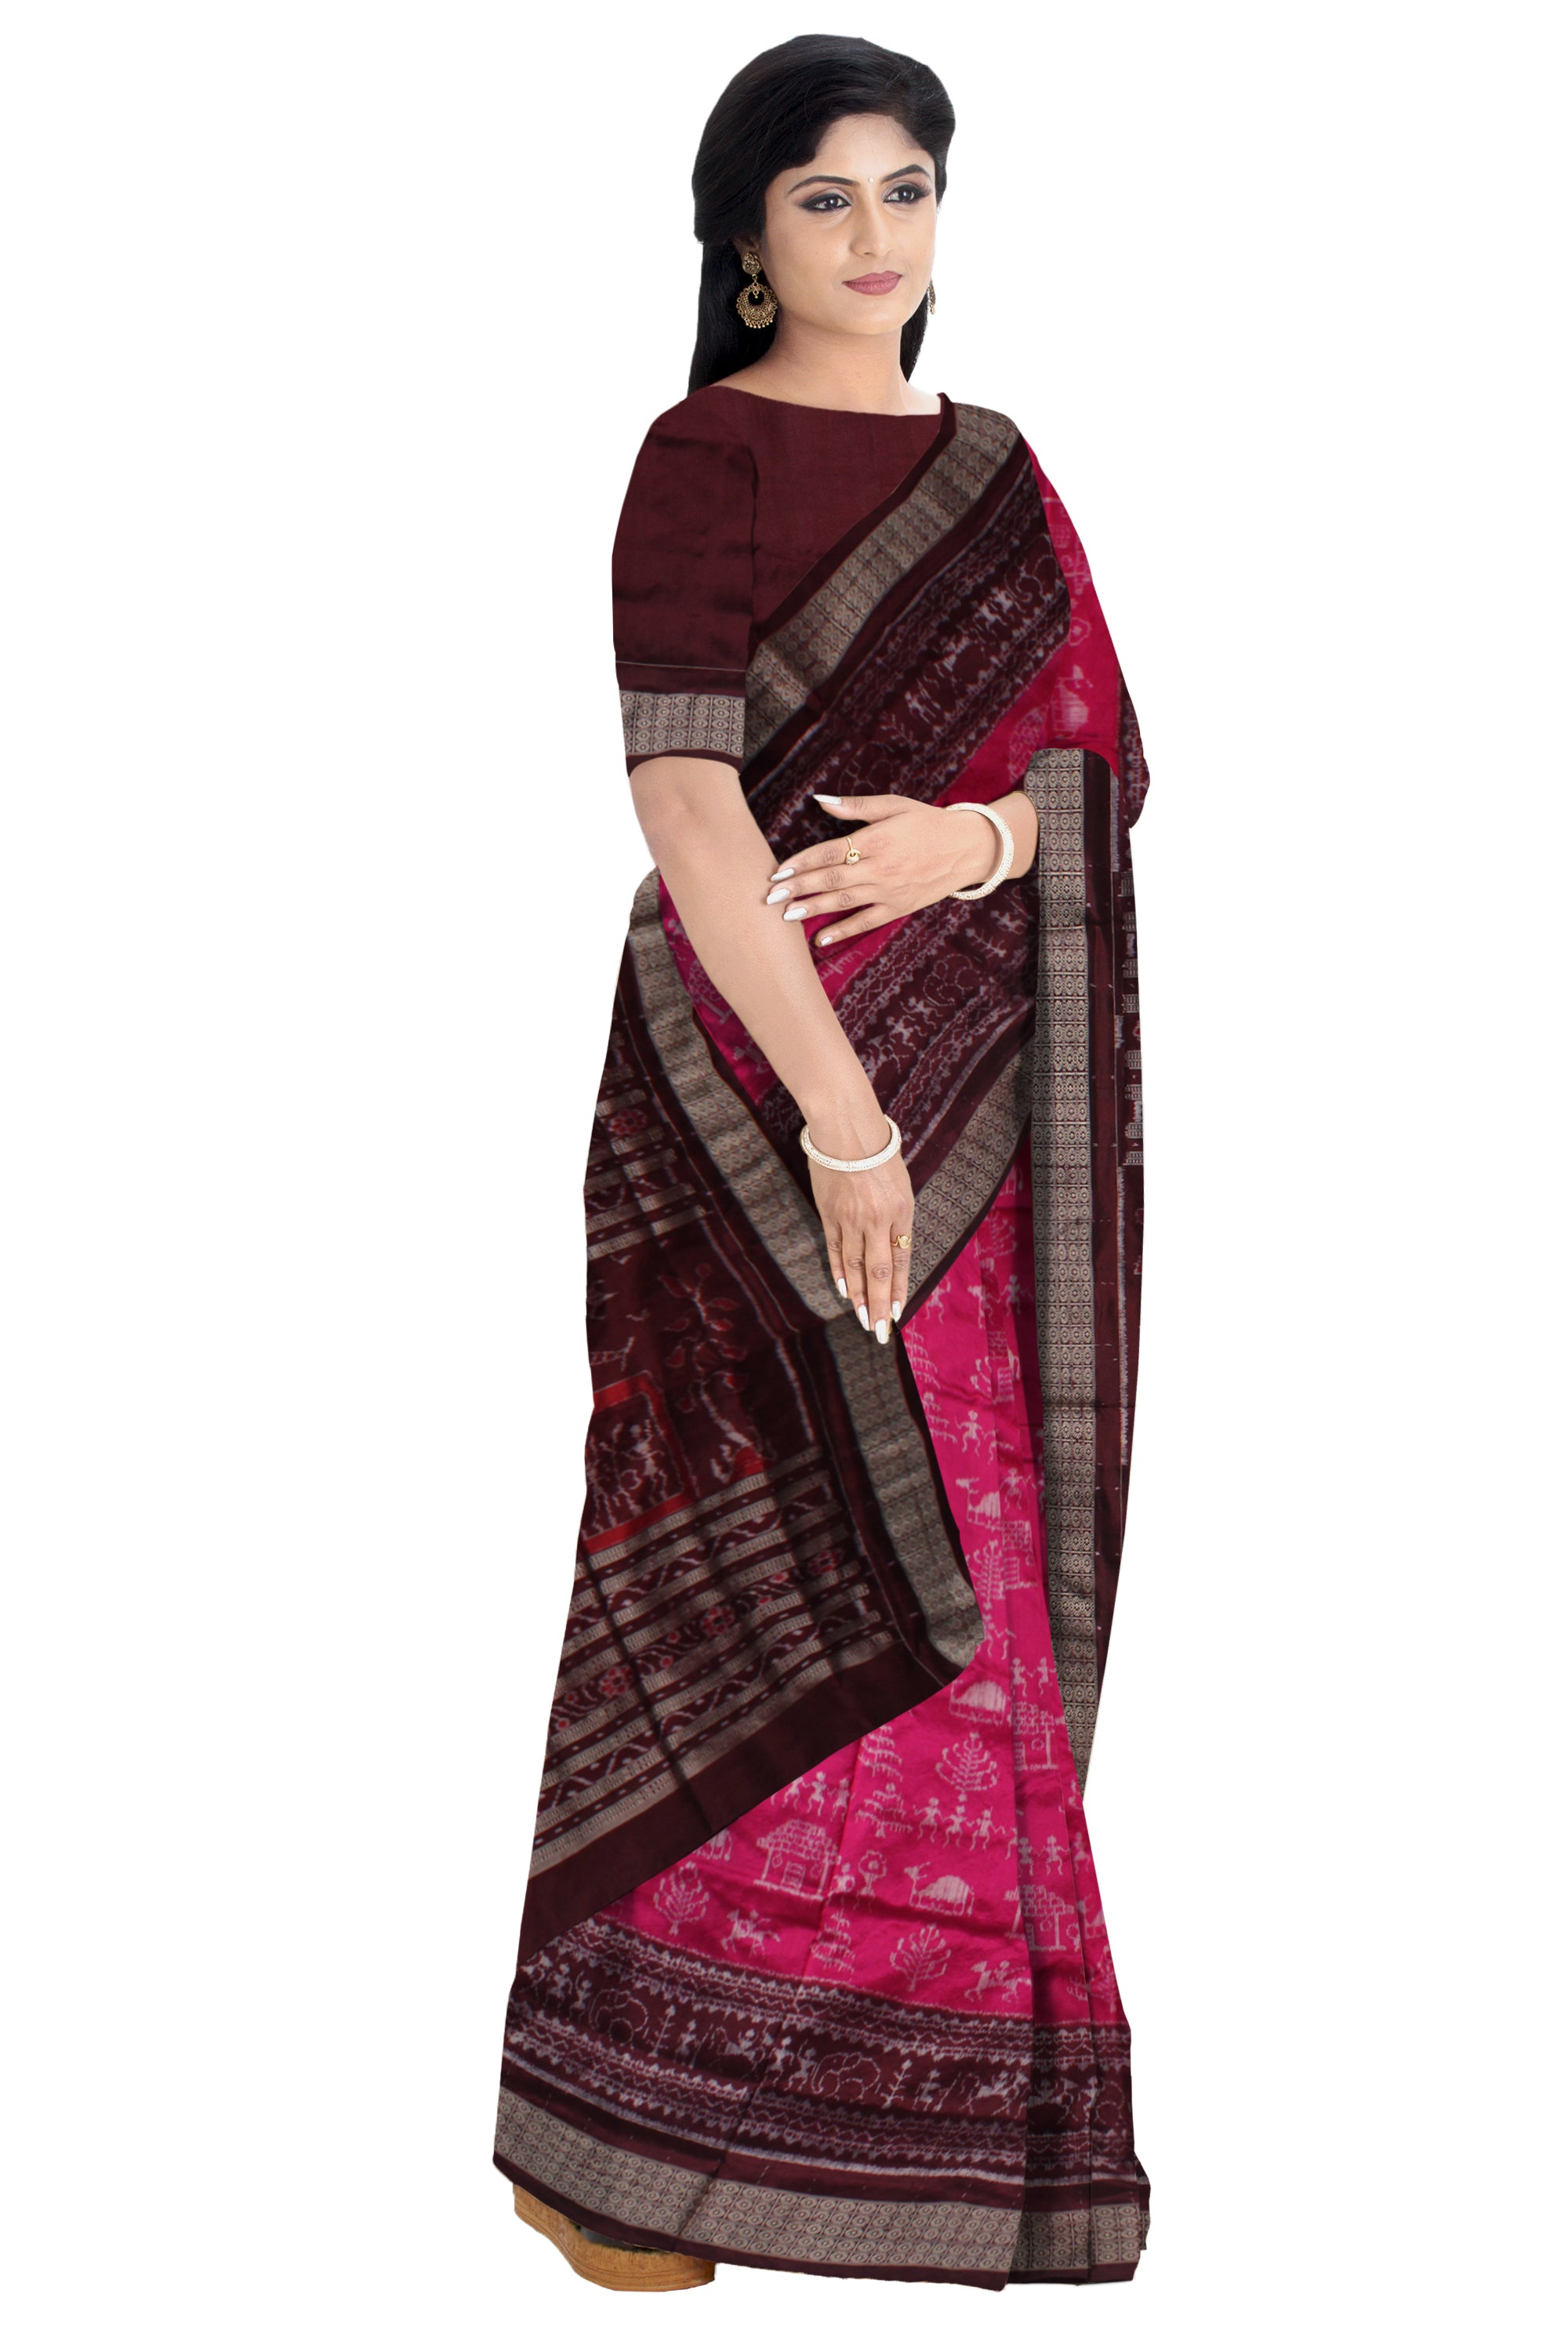 TERRACOTTA WITH HOUSE PATTERN PURE SILK SAREE IS RANI PINK AND COFFEE COLOR BASE, AVAILABLE WITH BLOUSE PIECE. - Koshali Arts & Crafts Enterprise